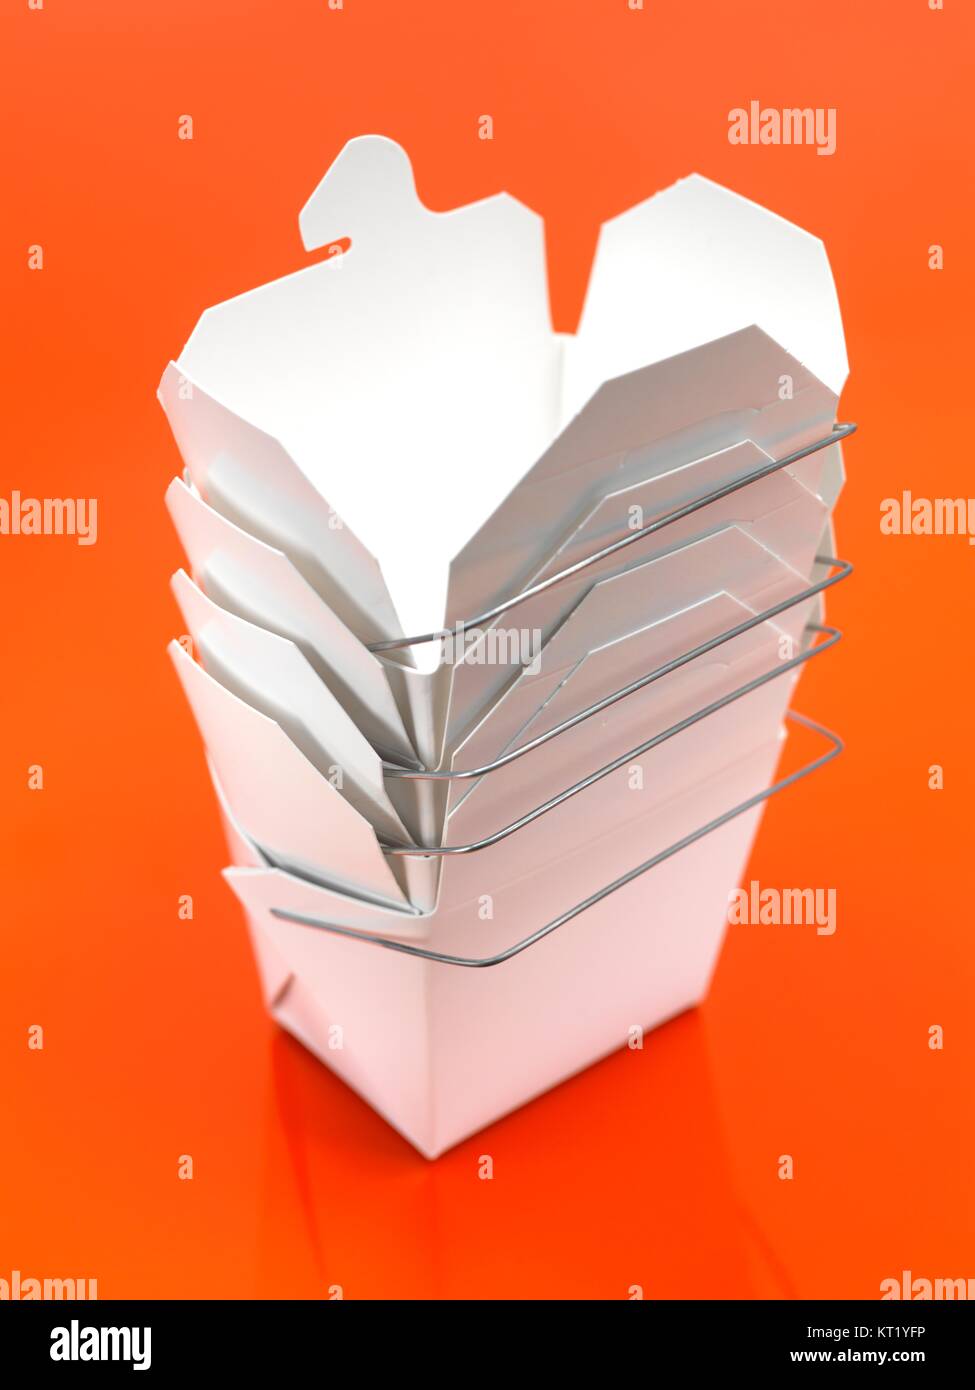 A Chinese takeaway container isolated against an orange background Stock Photo